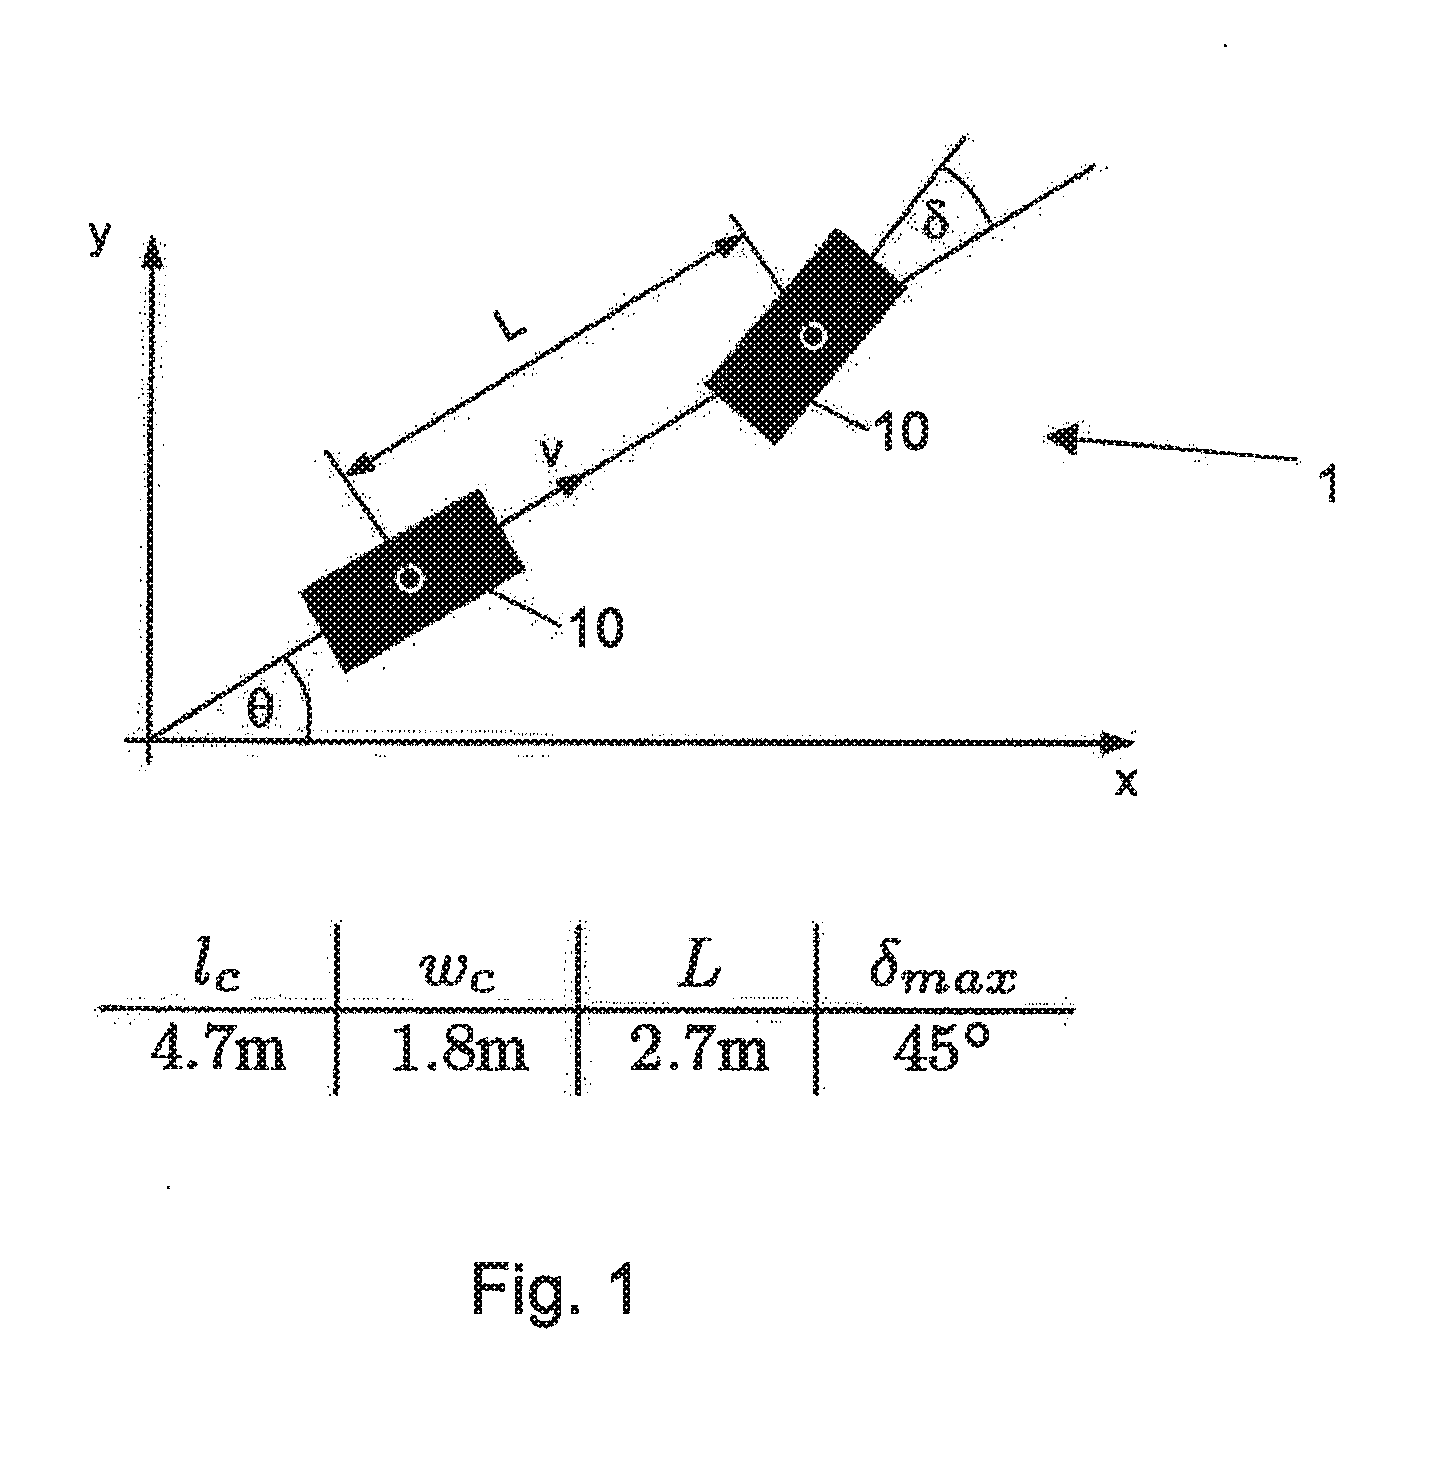 Method for steering a vehicle